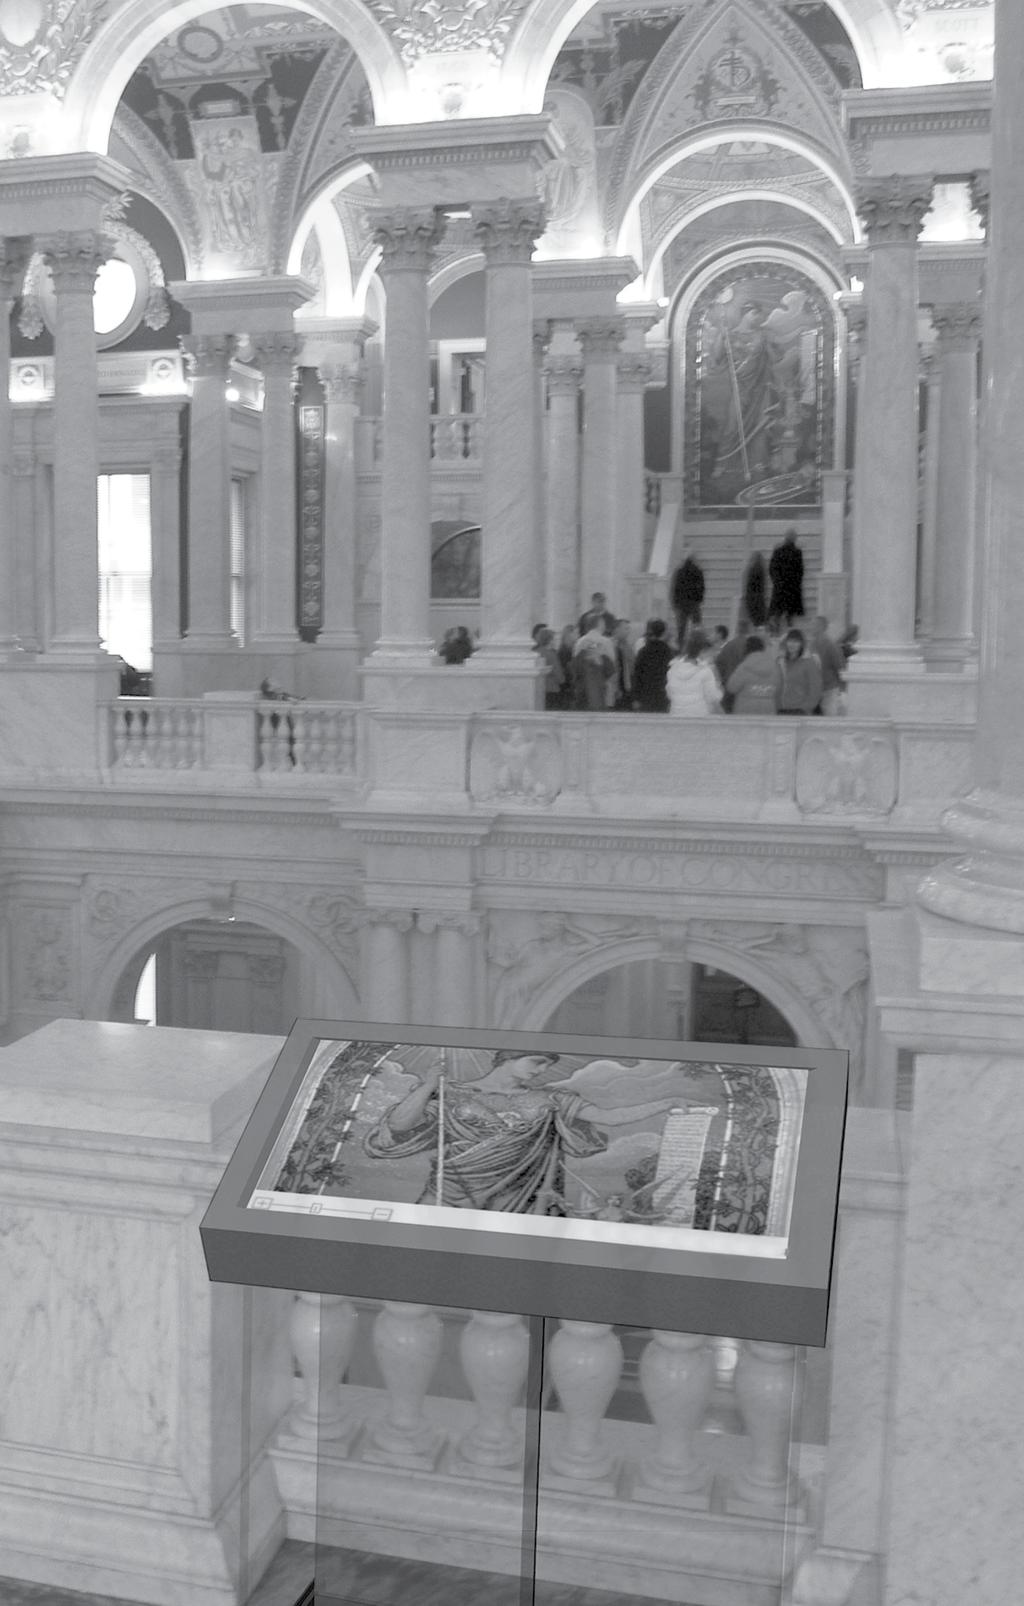 The Library of Congress: Where We Are Going oday, as the Library of Congress advances further into its third century, there is still no more fitting a symbol of its vision and aspirations than the